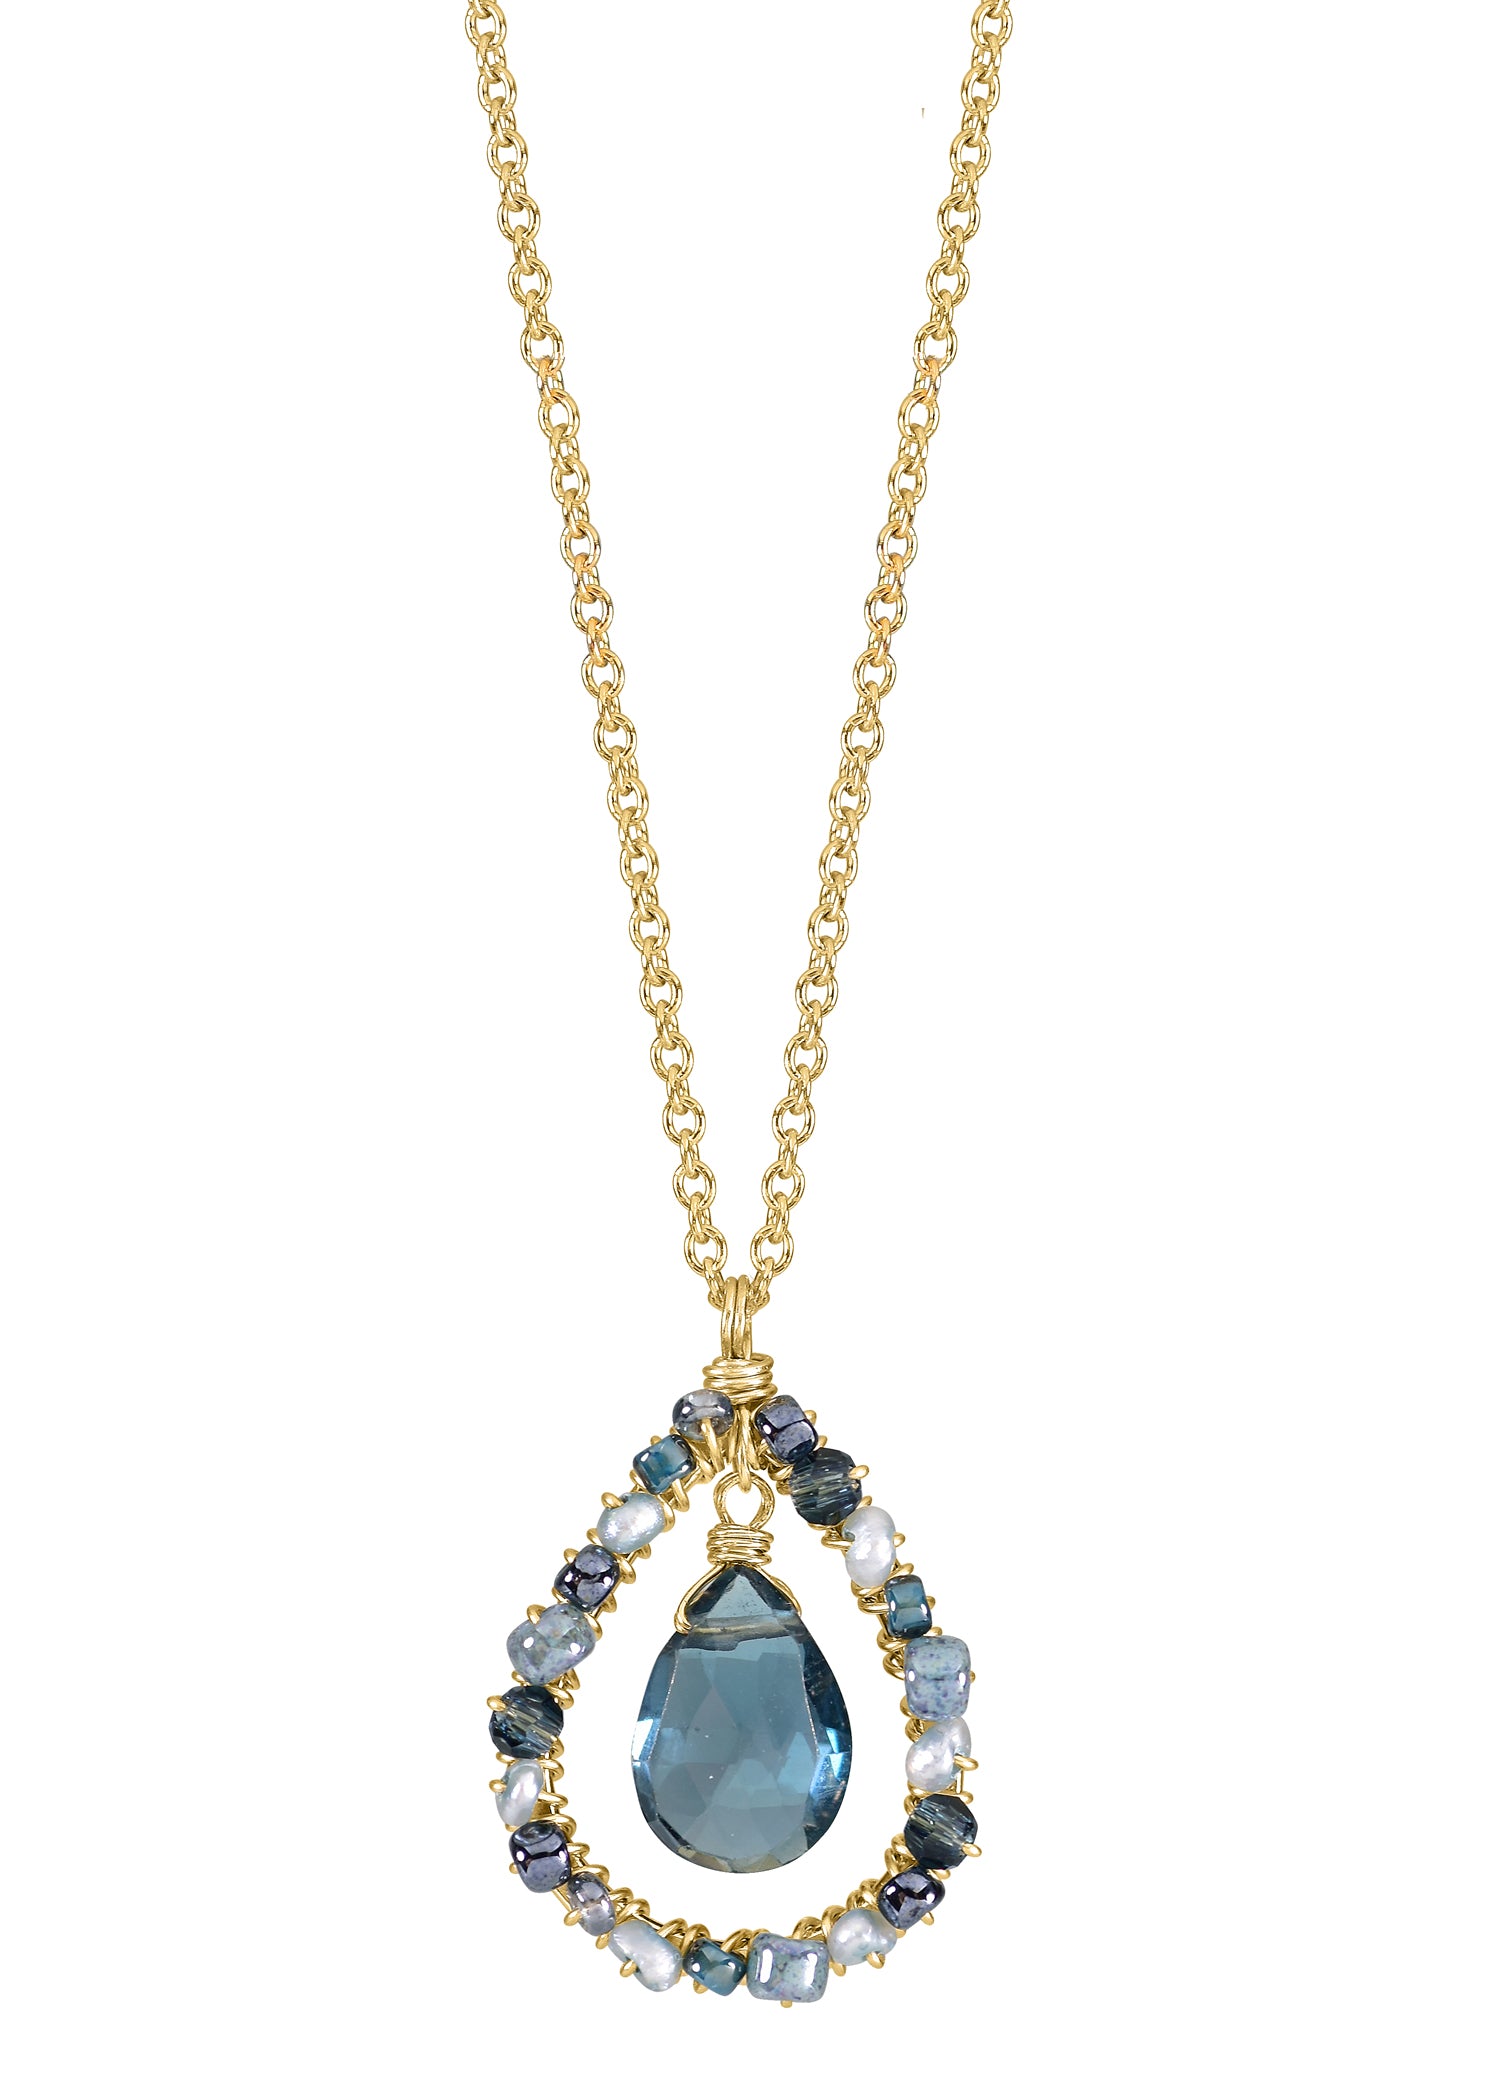 London blue topaz Freshwater pearl Crystal Seed beads 14k gold fill Necklace measures 16" in length Pendant measures 5/8" in length and 1/2" in width at the widest point Handmade in our Los Angeles studio